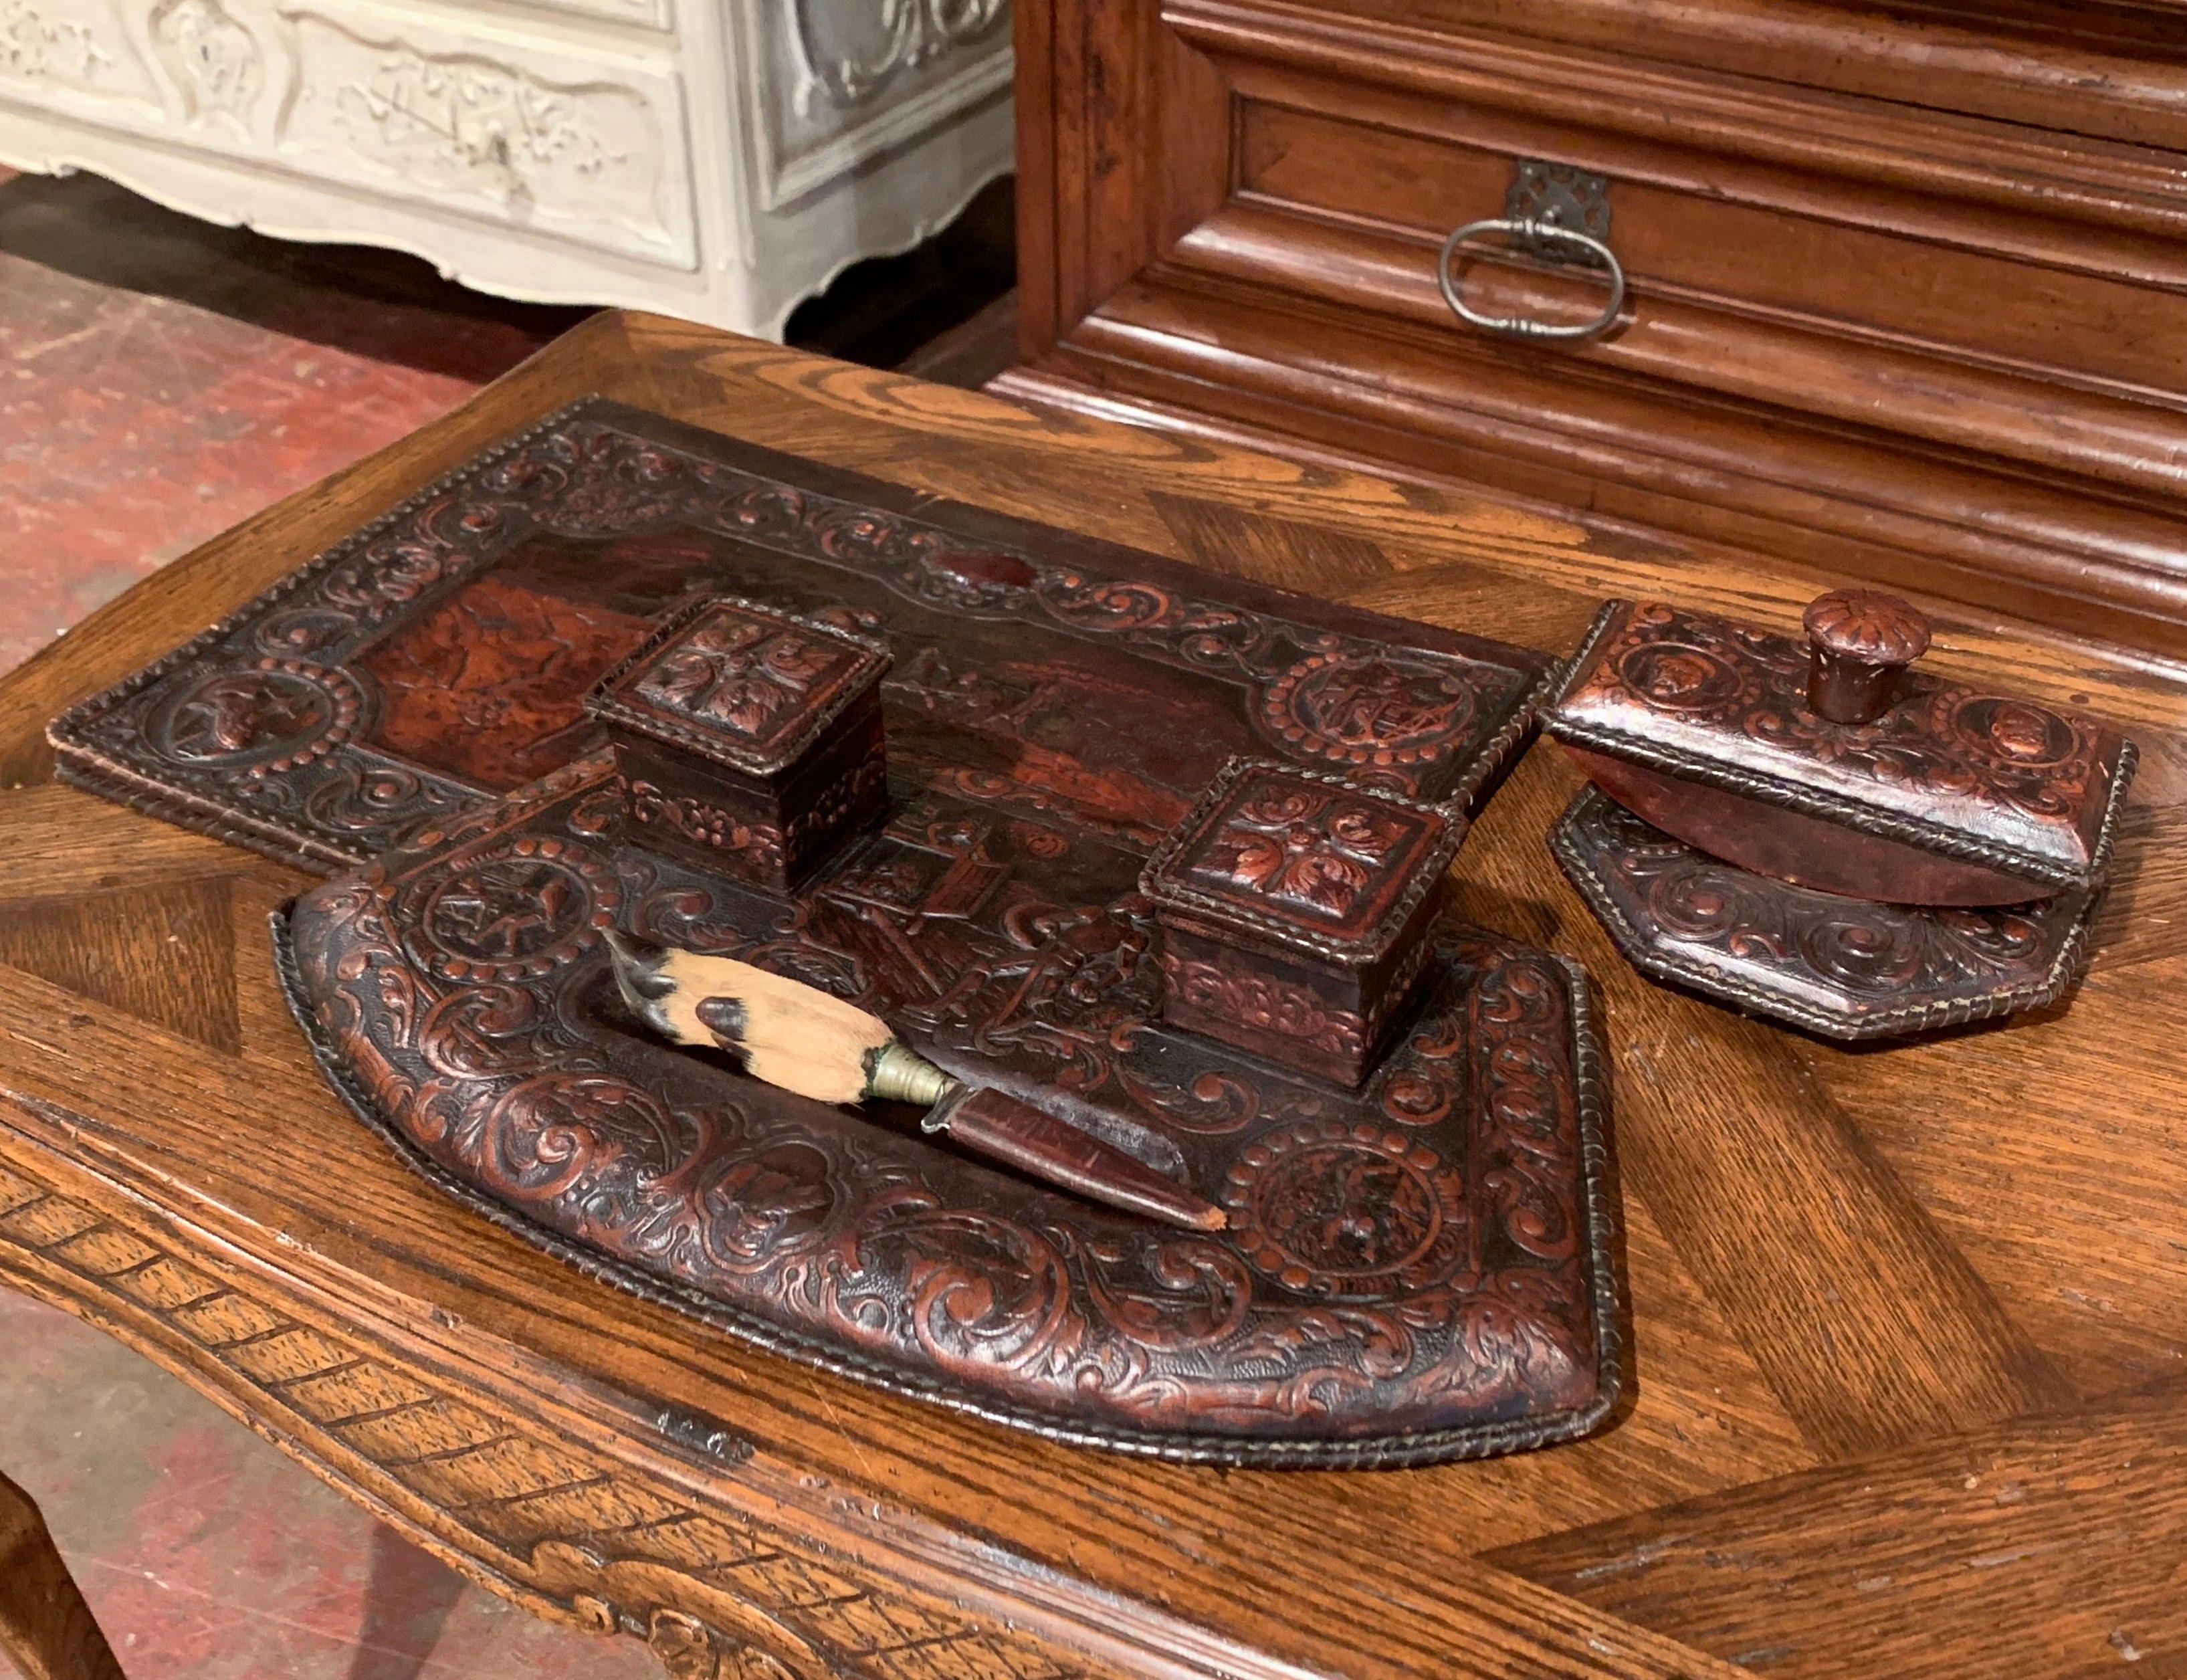 Decorate a man's office desk with this elegant Gothic set; created in France circa 1860 and made of brown embossed and repousse leather, the desk set have five pieces comprising a large pad, a holding tray with letter opener embellished with deer